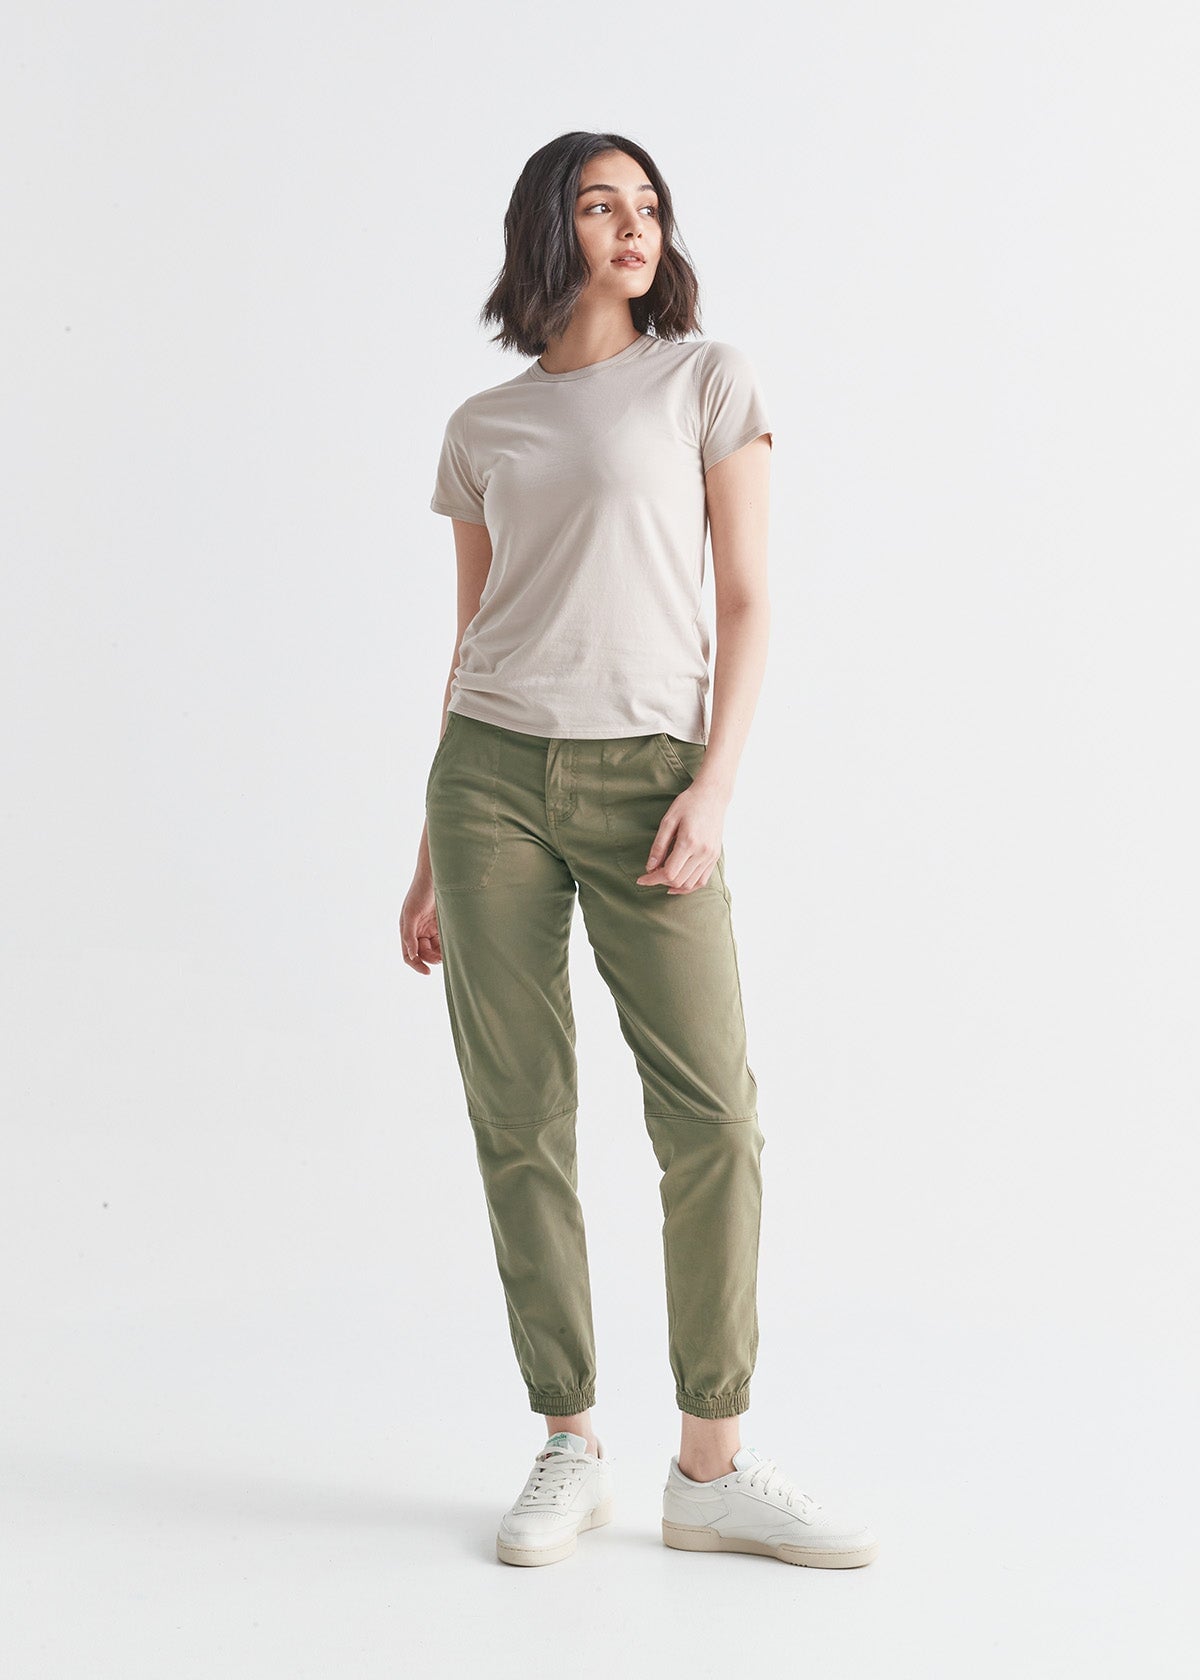 Travel Pants & Jeans for Women